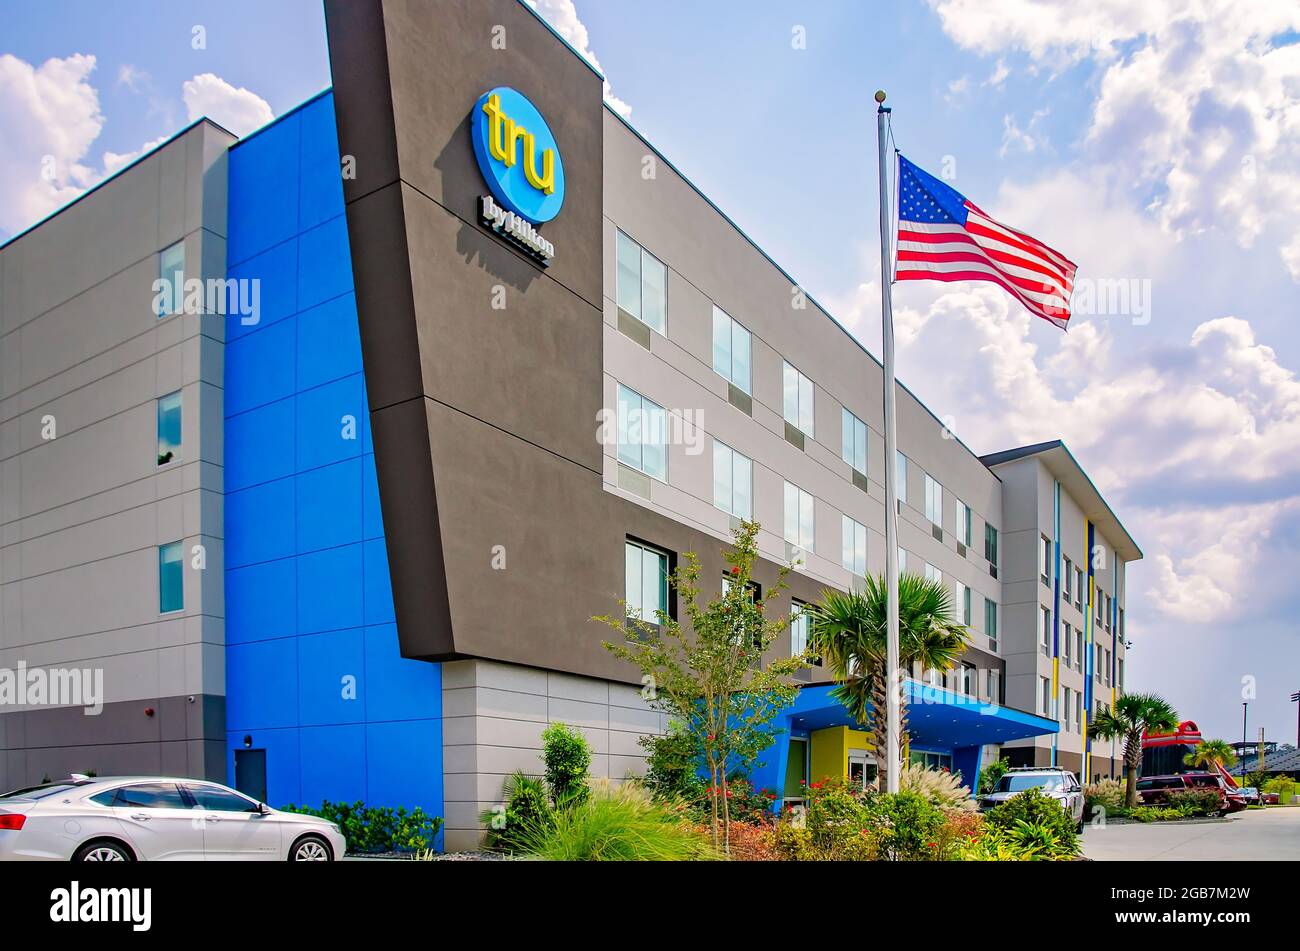 A Tru by Hilton hotel is pictured on Satchel Paige Drive, Aug. 1, 2021, in Mobile, Alabama. Hilton Worldwide launched the new midscale hotel brand. Stock Photo